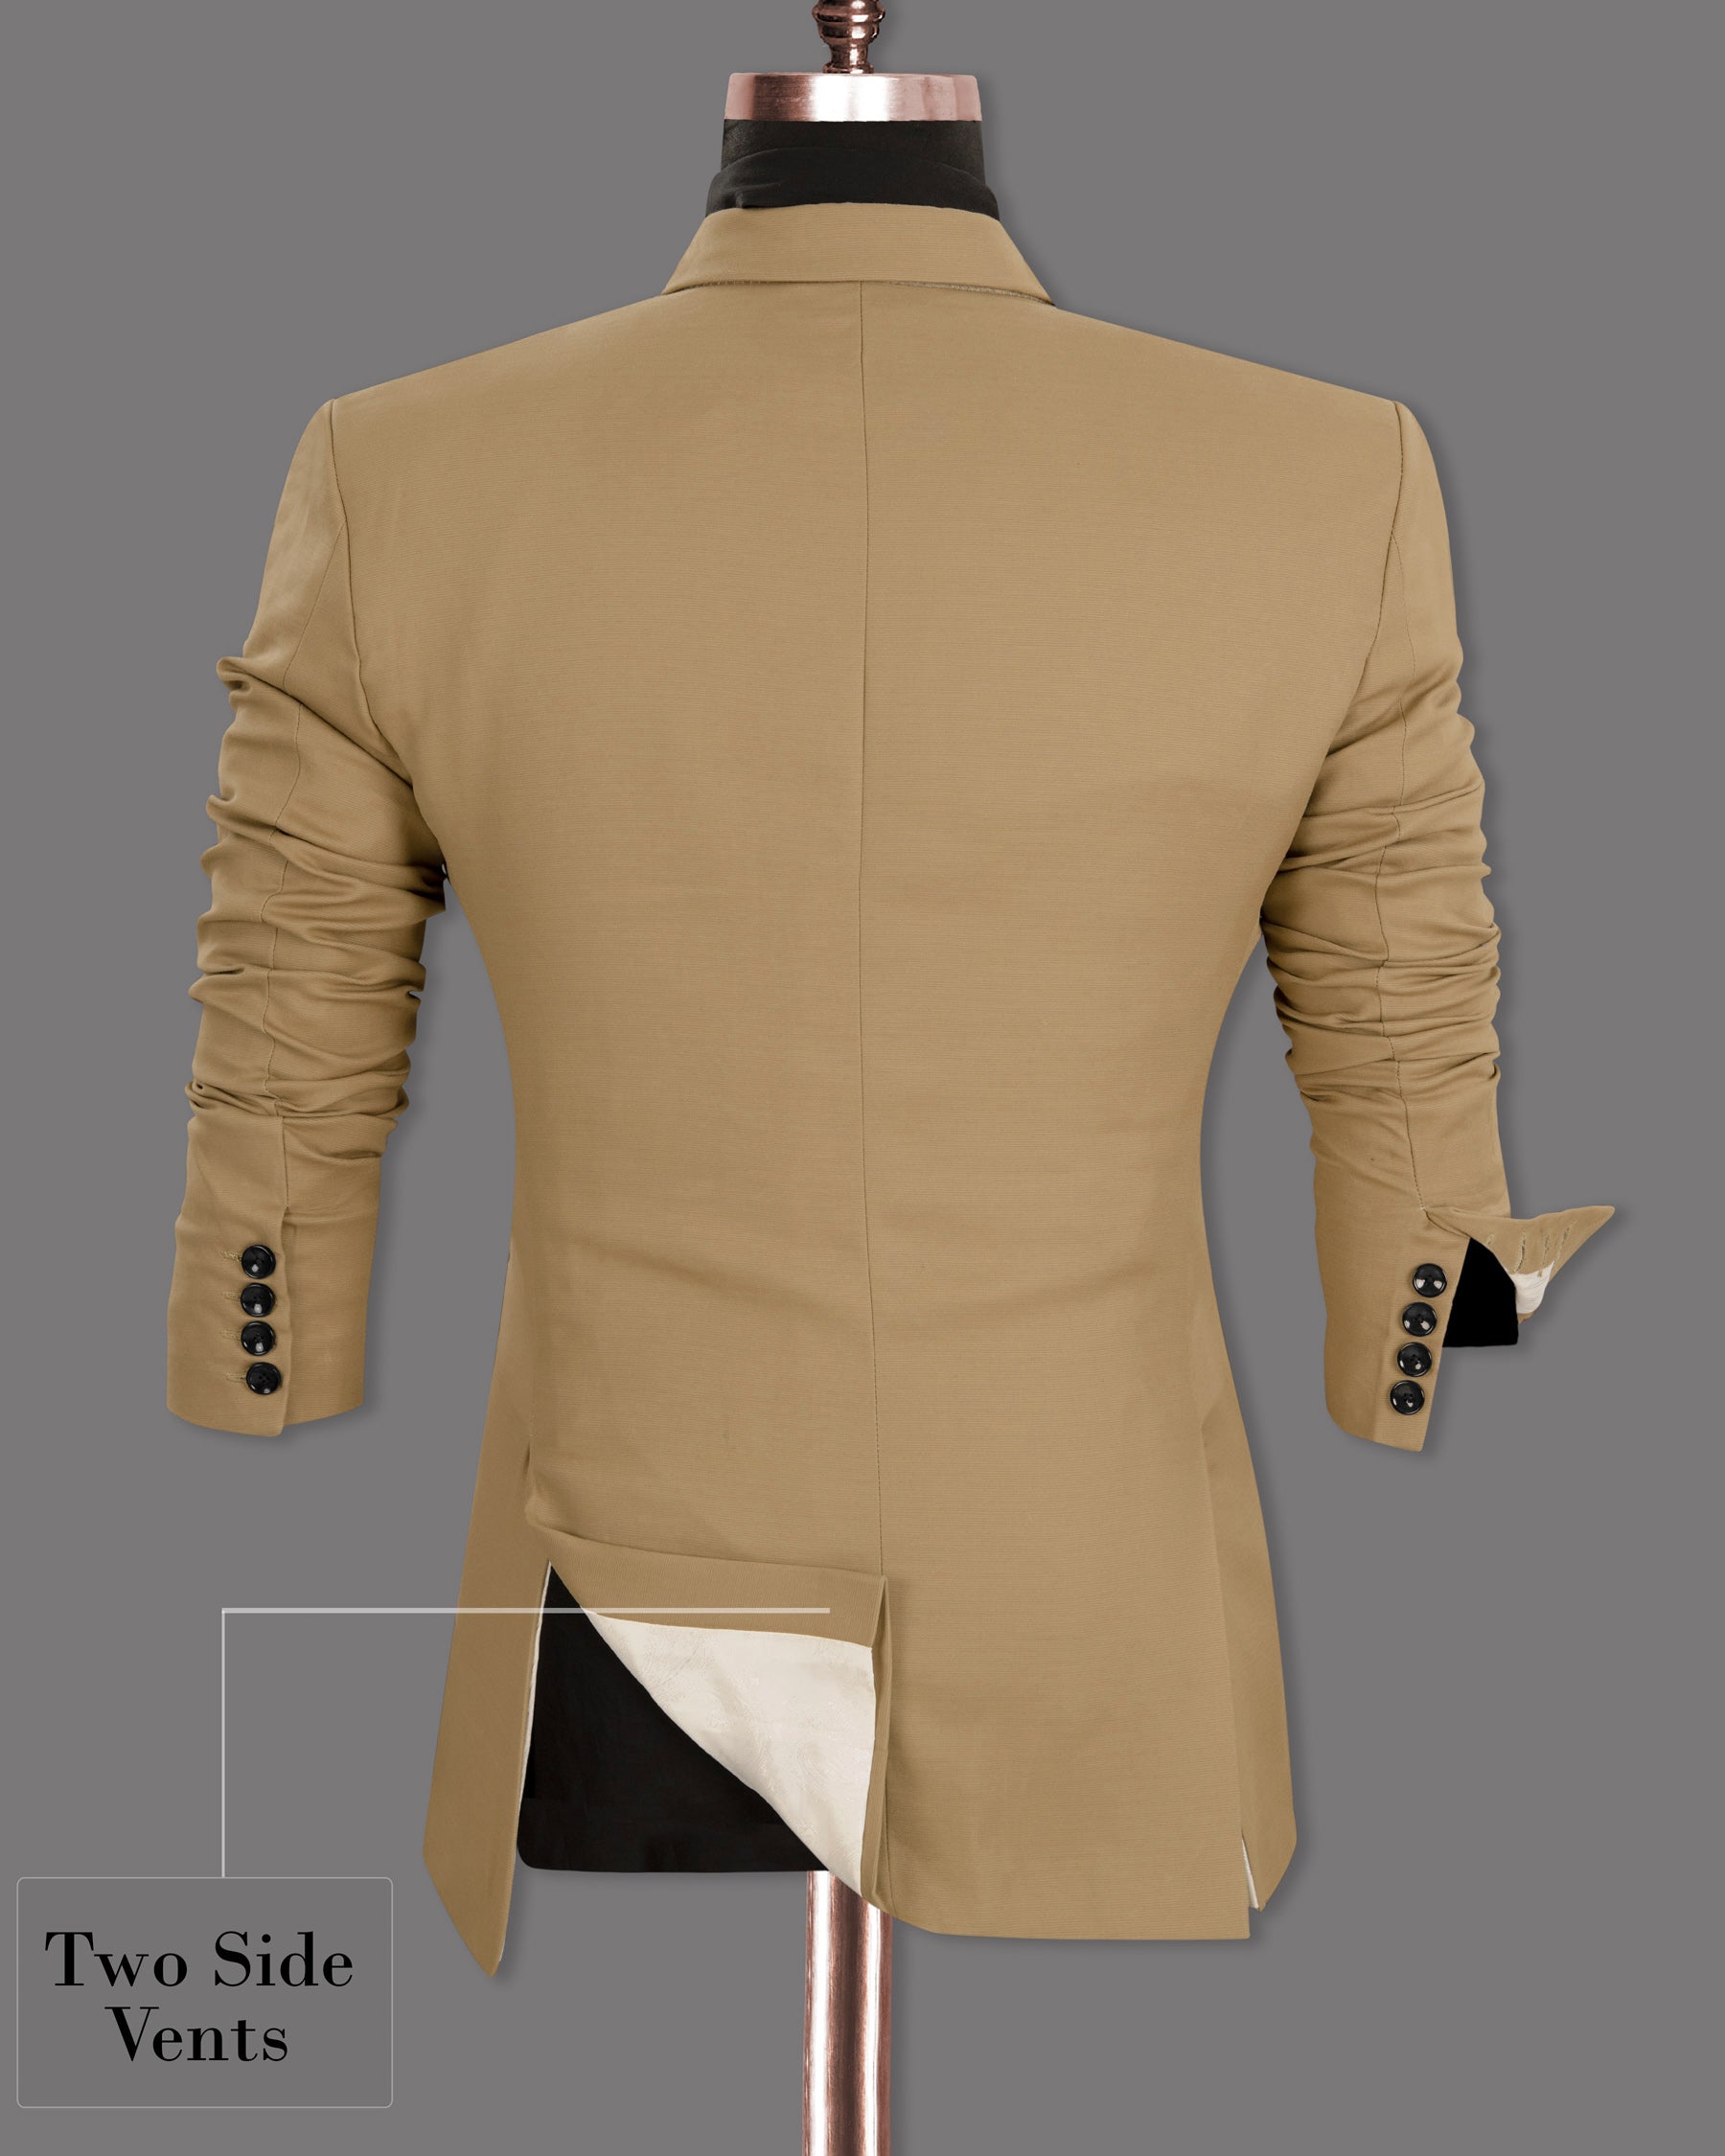 Mongoose Cream Stretchable Double Breasted Premium Cotton Blazer BL1266-DB-44, BL1266-DB-48, BL1266-DB-52, BL1266-DB-54, BL1266-DB-56, BL1266-DB-58, BL1266-DB-60, BL1266-DB-36, BL1266-DB-38, BL1266-DB-40, BL1266-DB-42, BL1266-DB-46, BL1266-DB-50